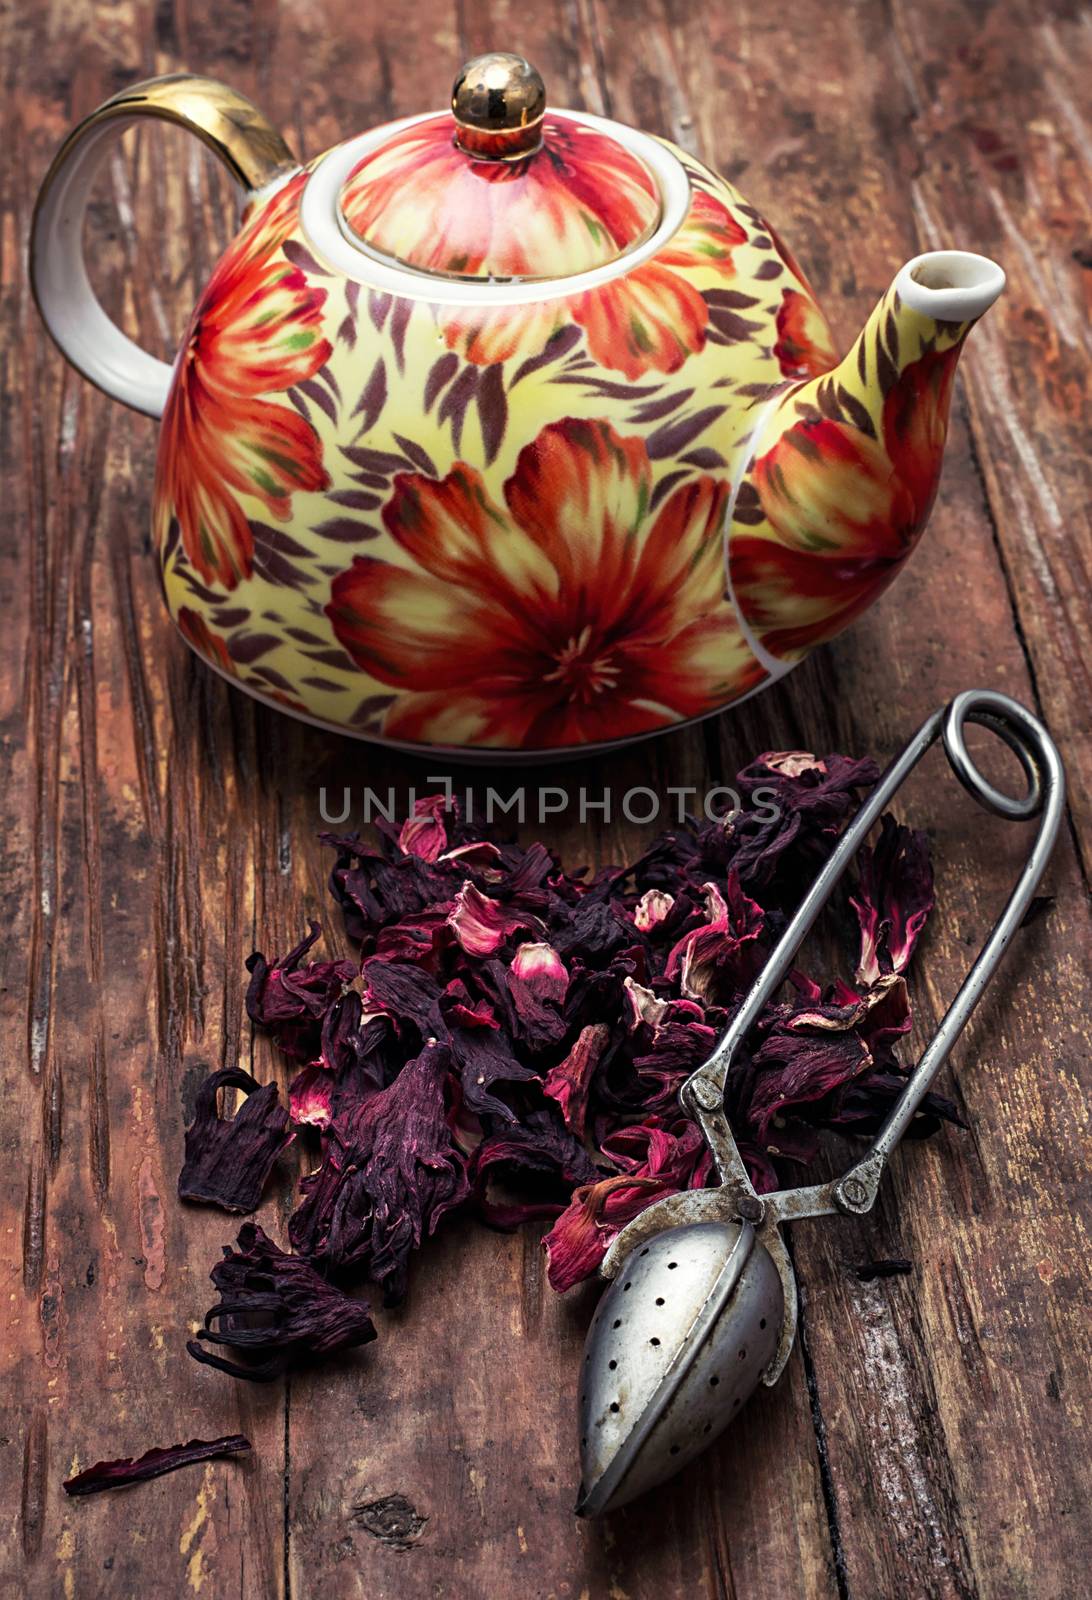 the teapot in the background of elite sorts of tea.the image is tinted in vintage style